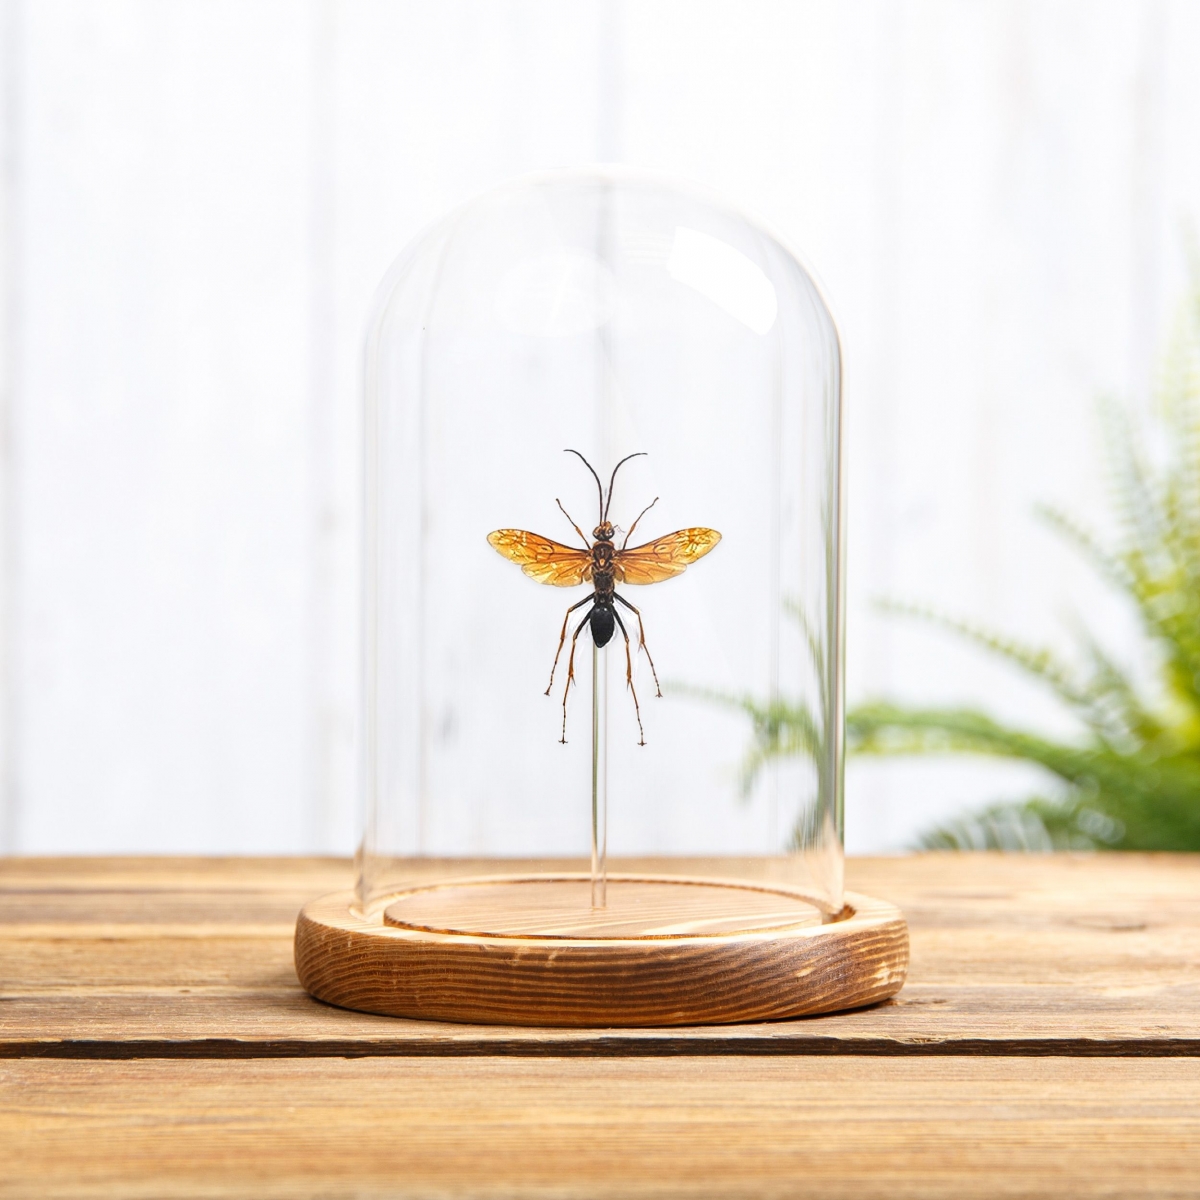 Large Pepsine Spider Wasp in Glass Dome with Wooden Base  (Hemipepsis sp)